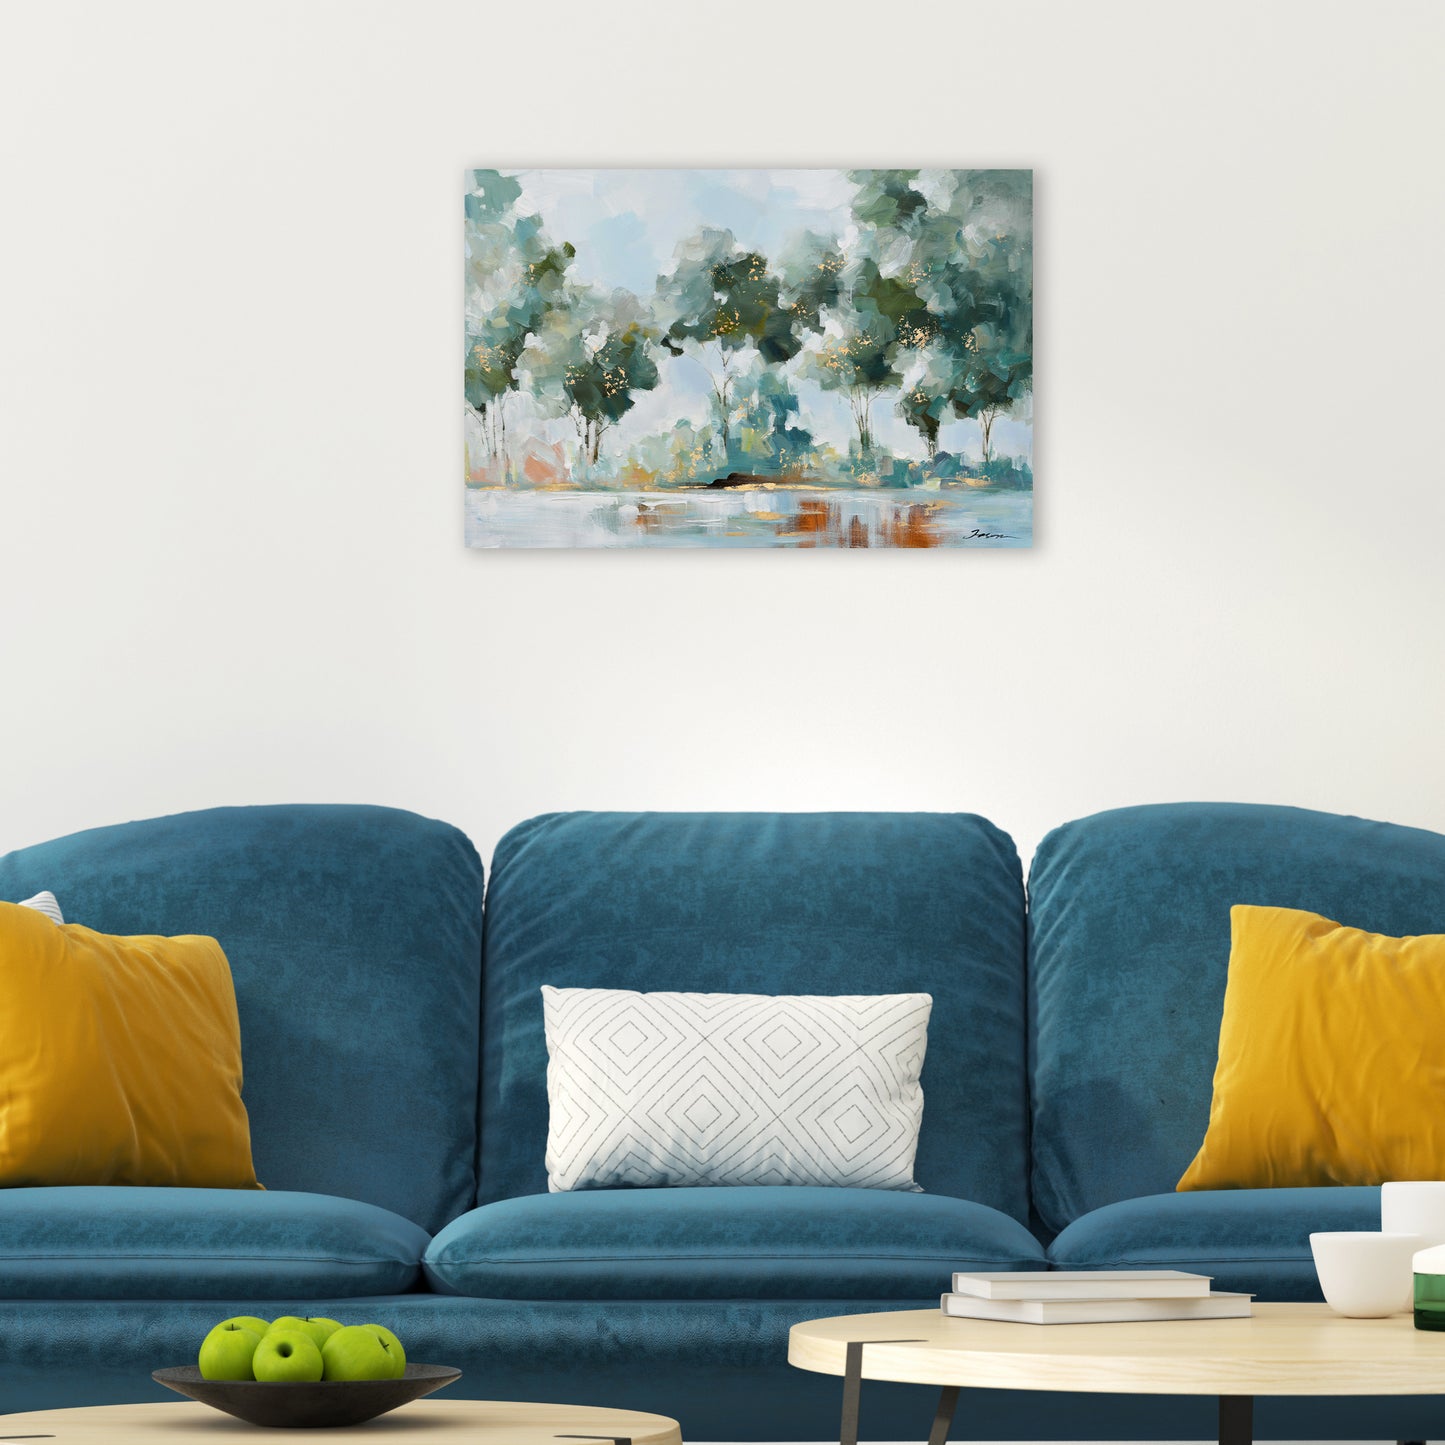 Wrapped Canvas Painting Wall Art for living room, bedroom, office